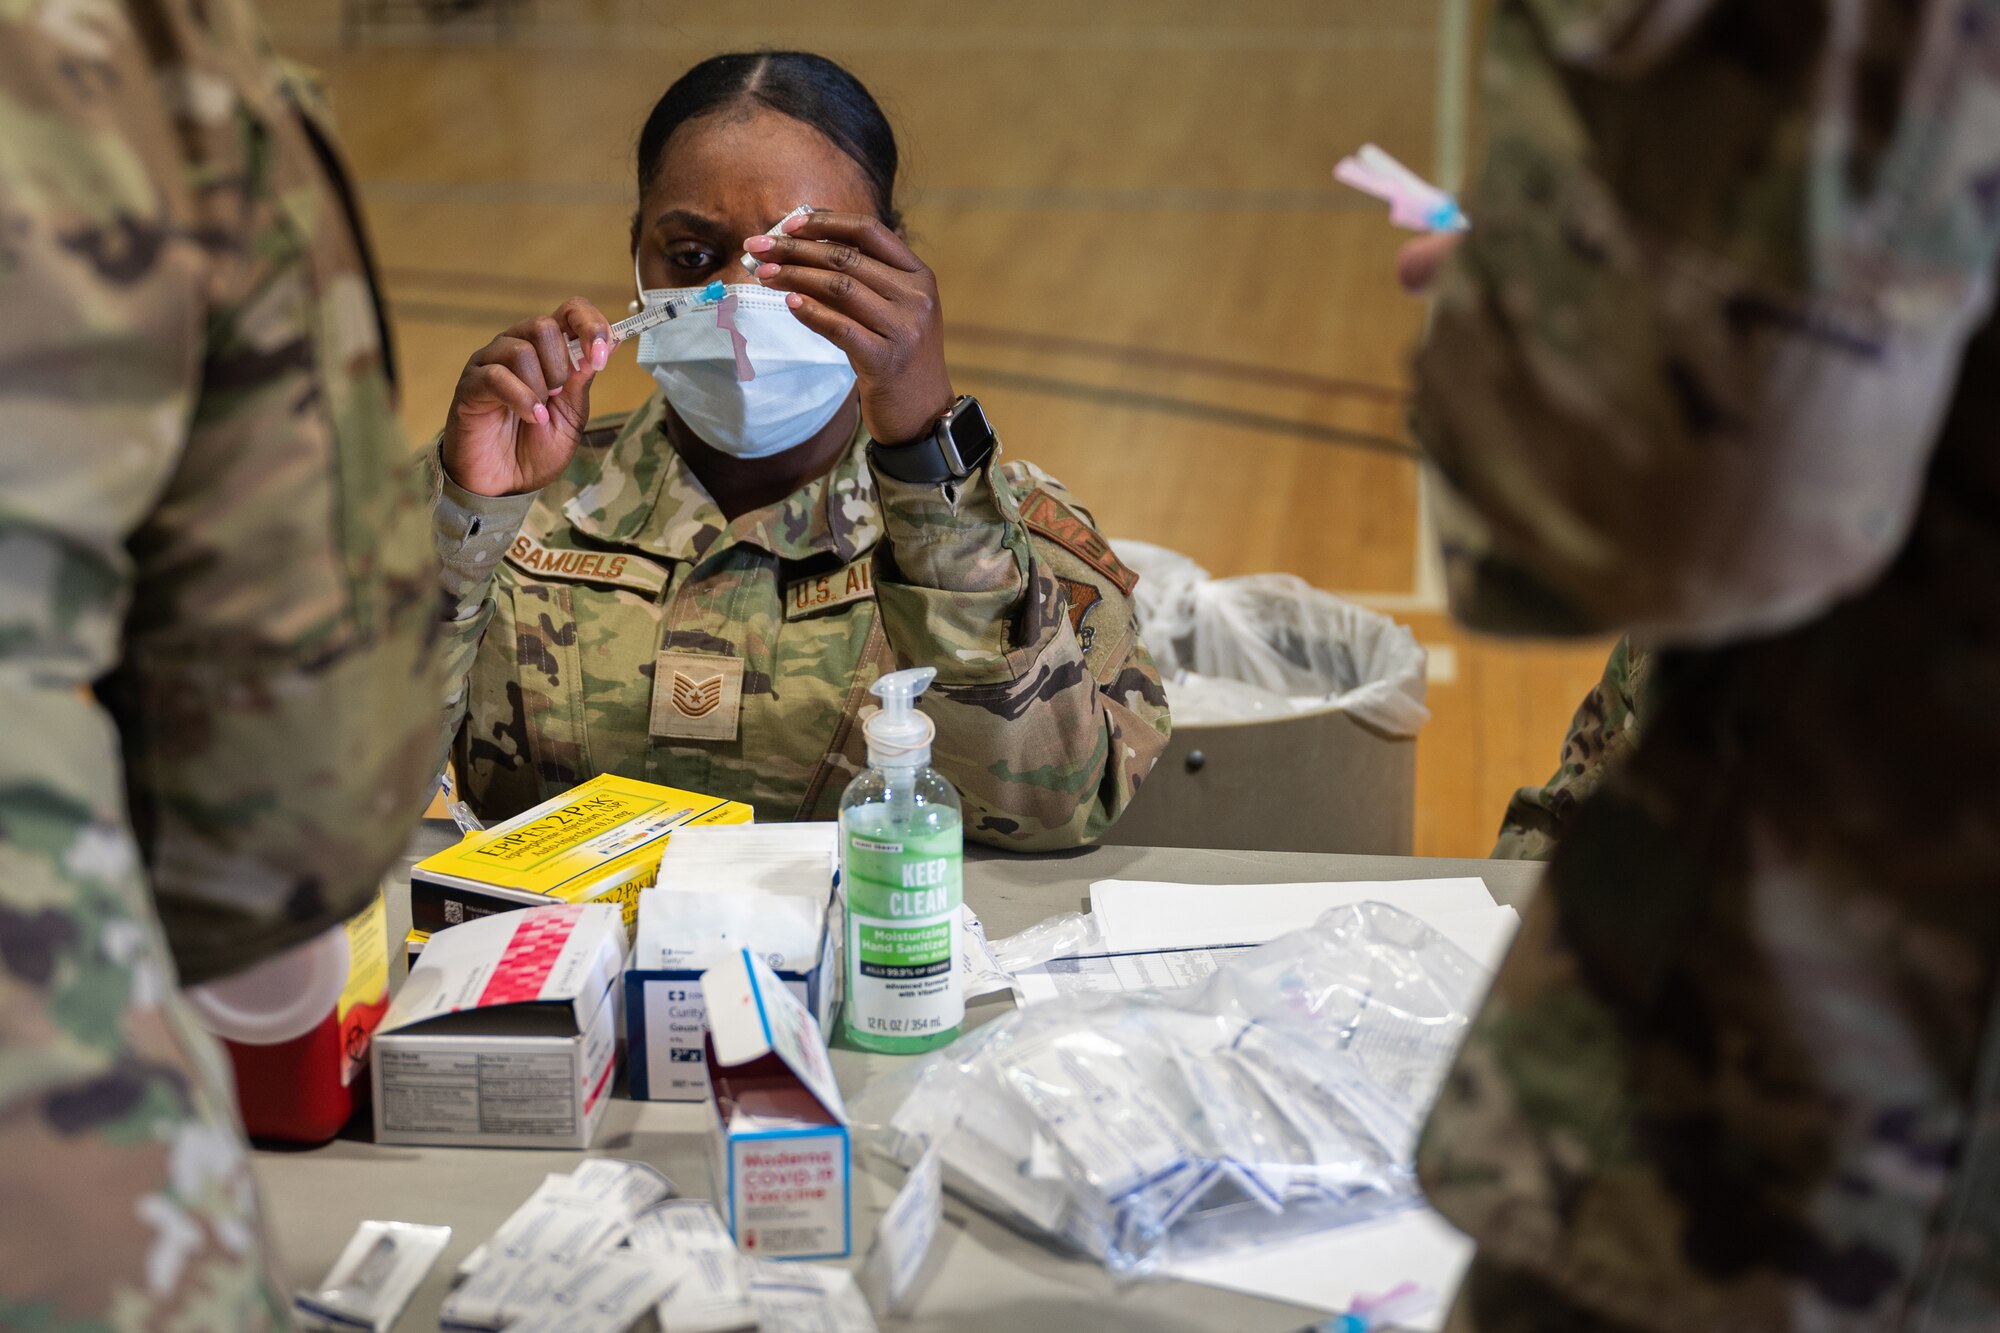 A woman in a military uniform carefully fills a medical syringe from a vial.